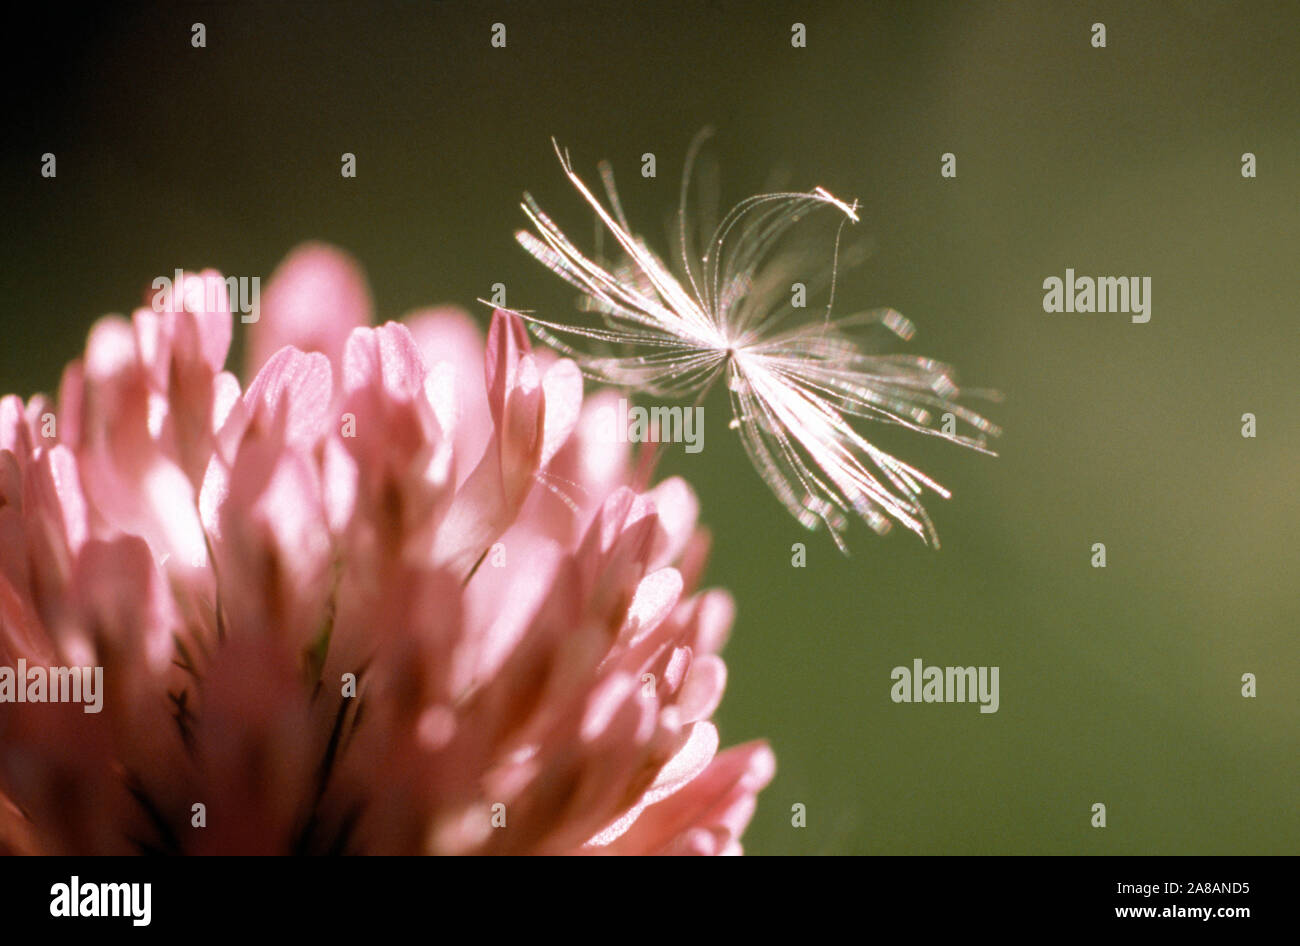 Extreme close-up of pink flower and seed Stock Photo